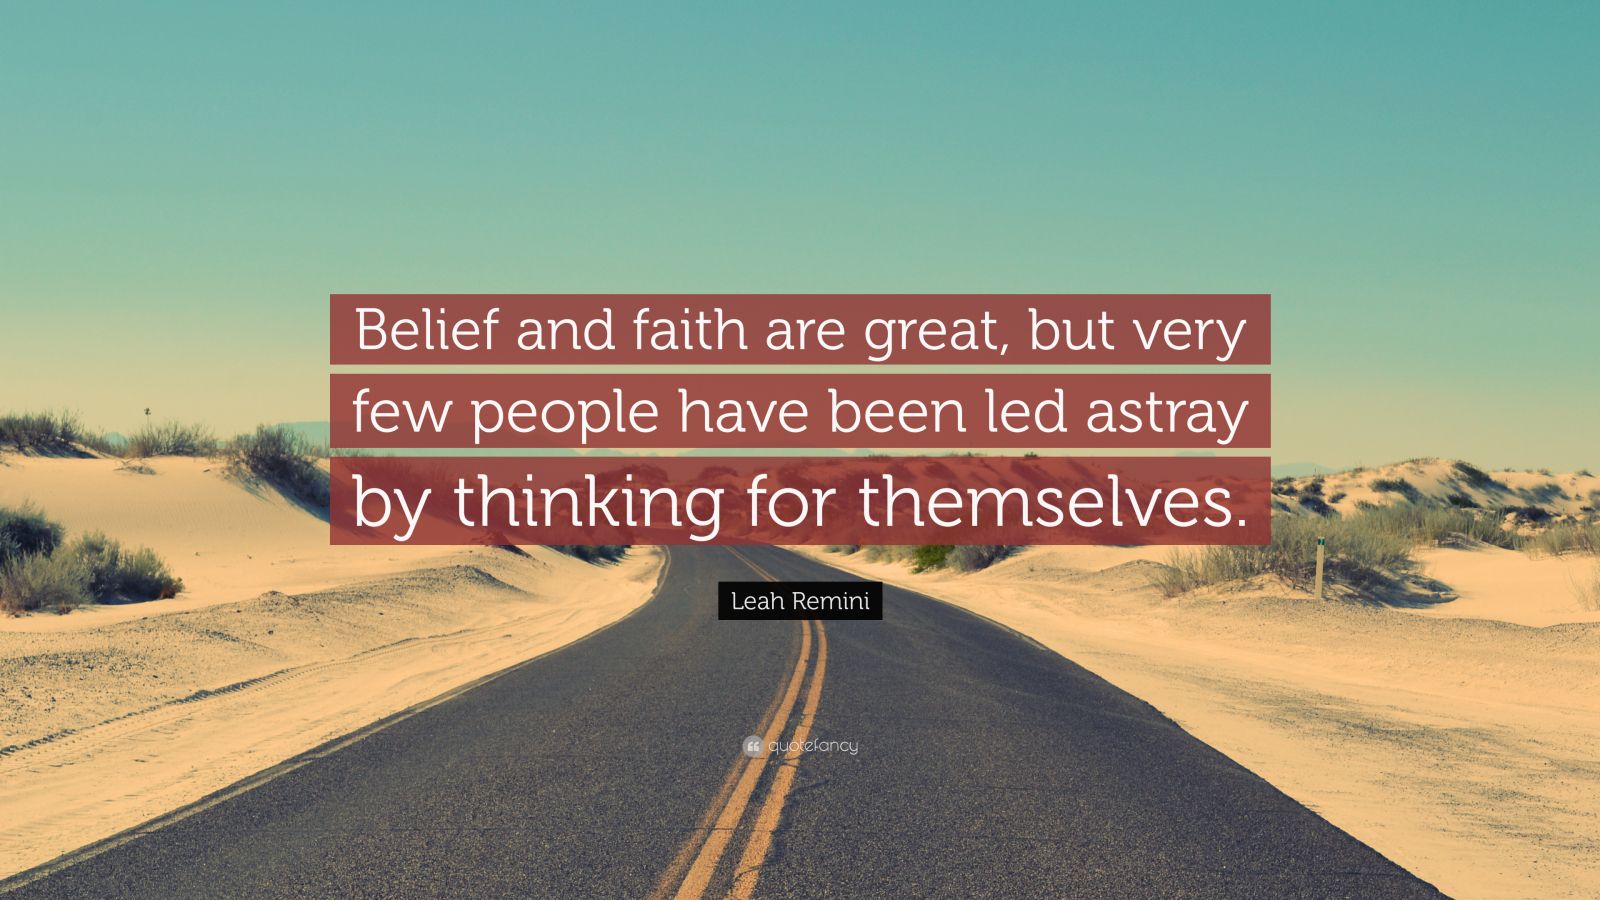 Leah Remini Quote: “Belief and faith are great, but very few people ...